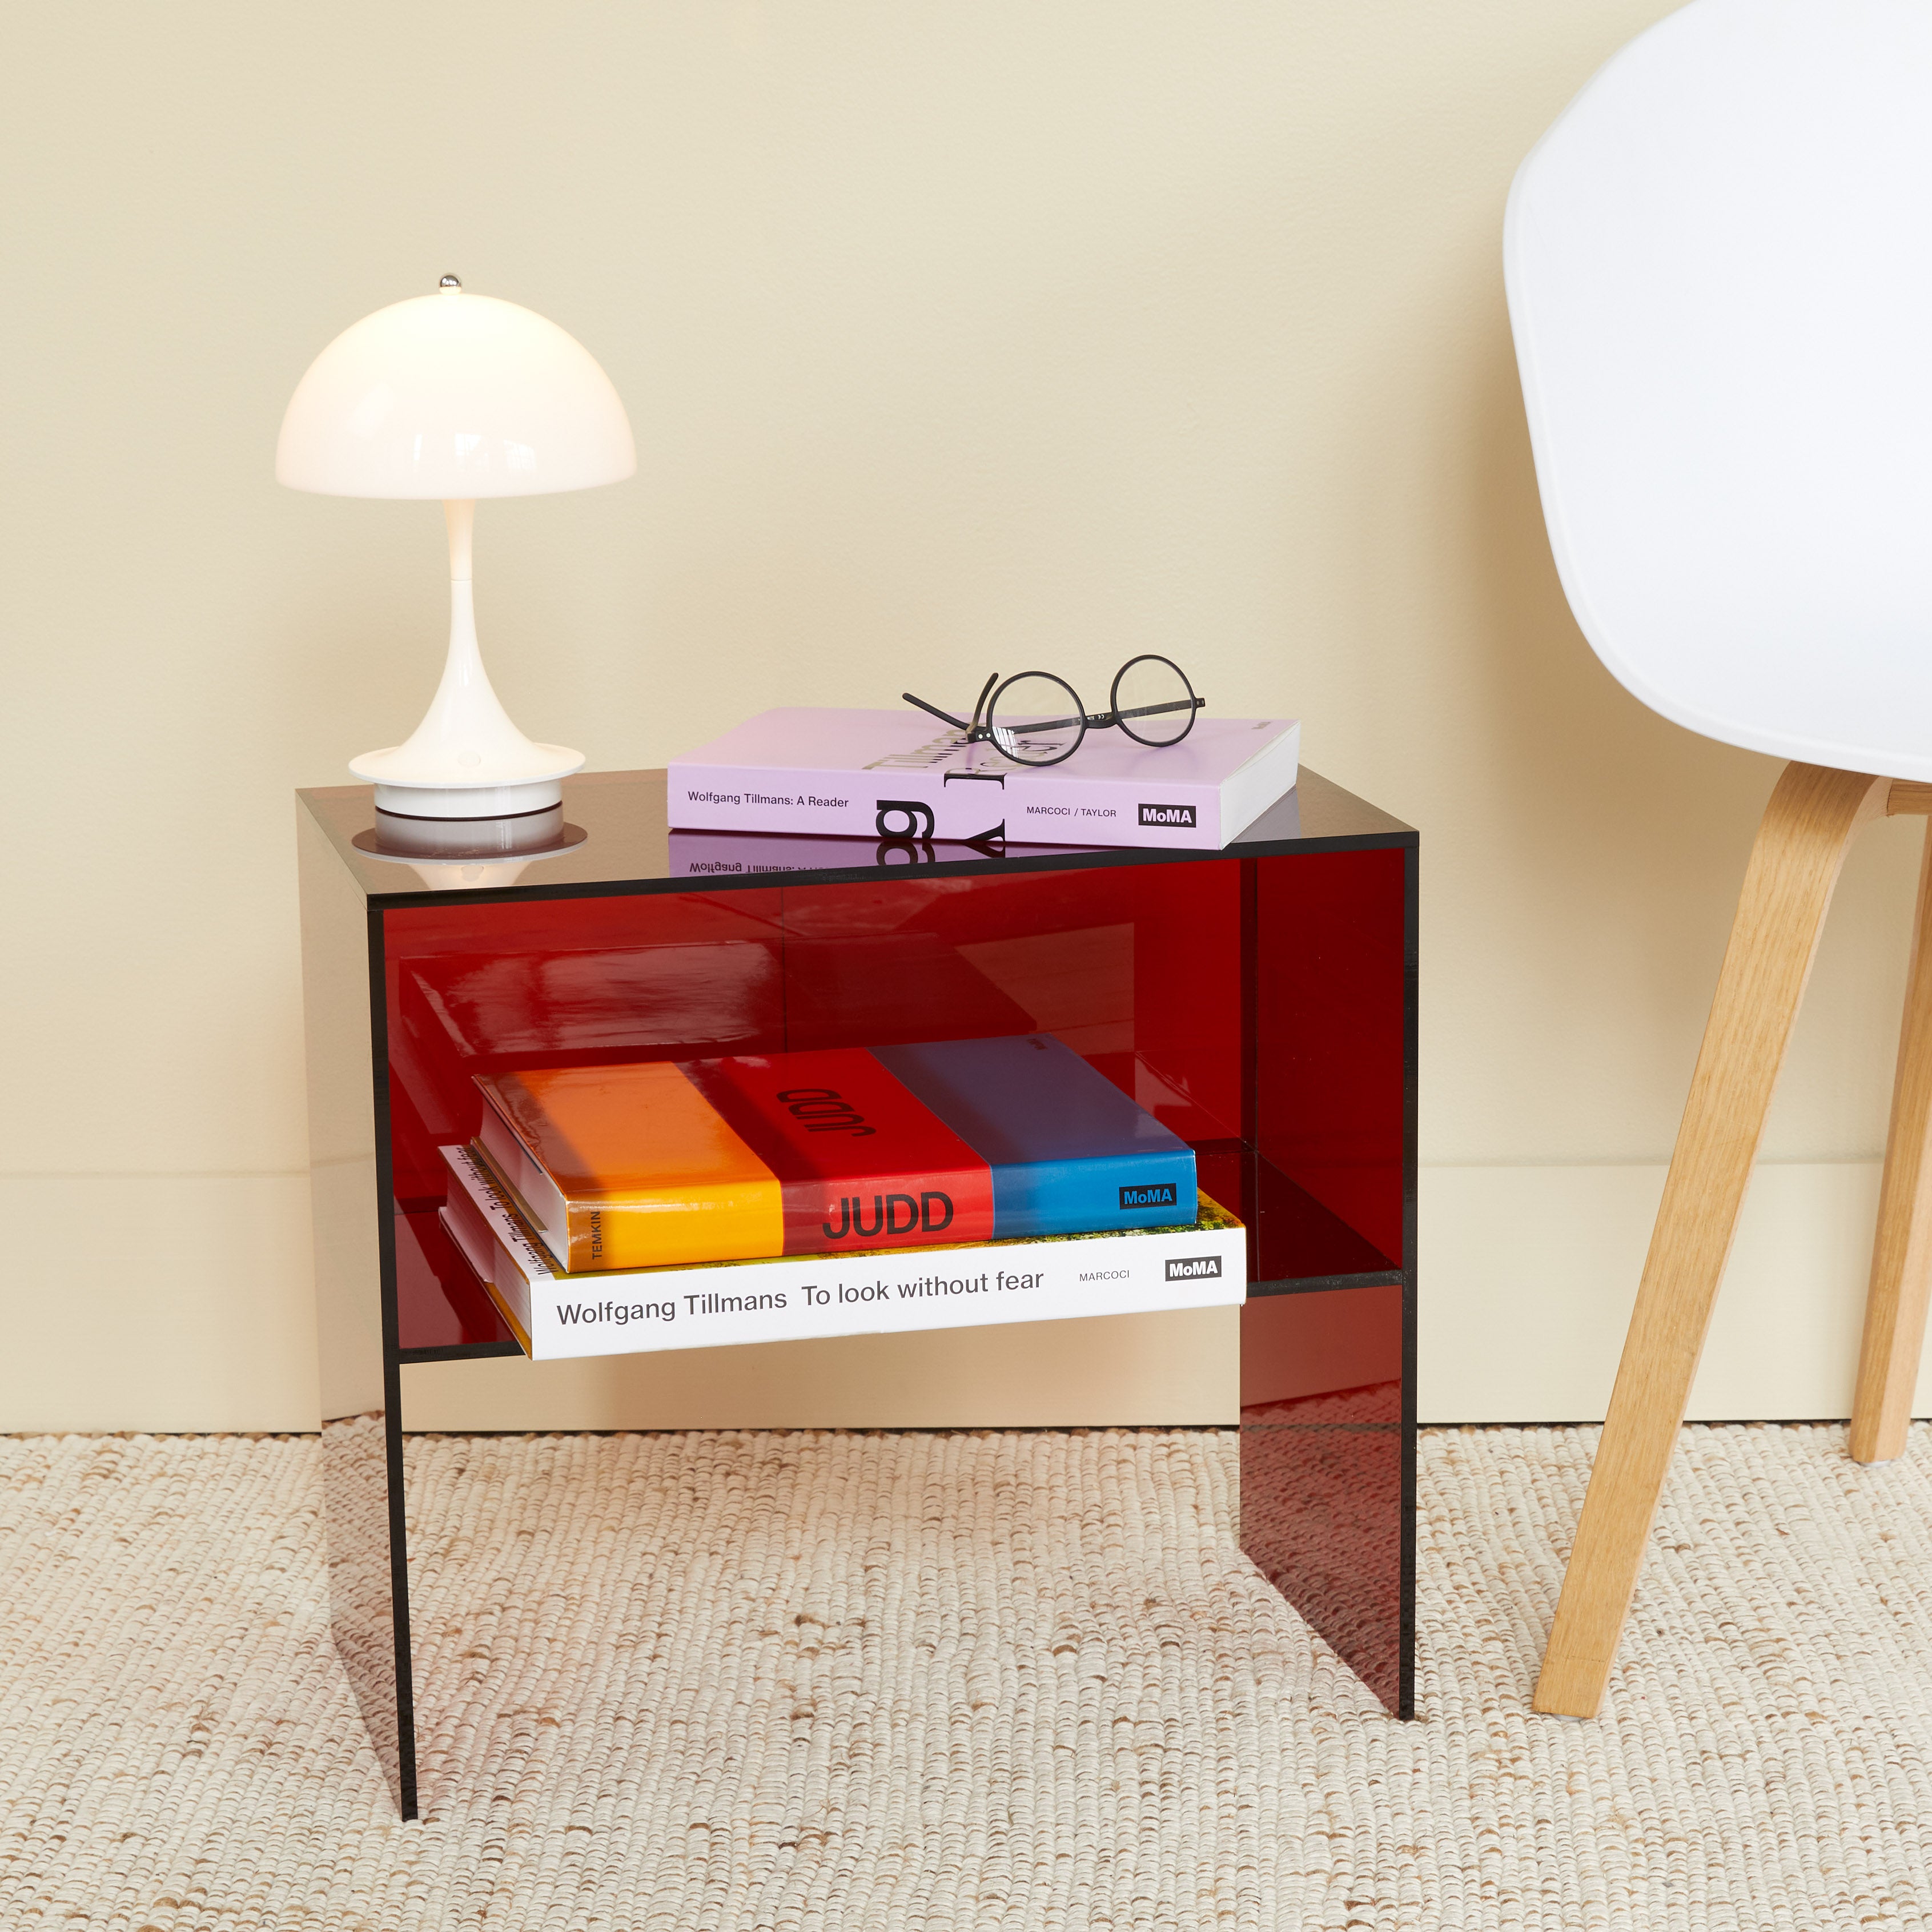 Two-Way Side Table - Blue